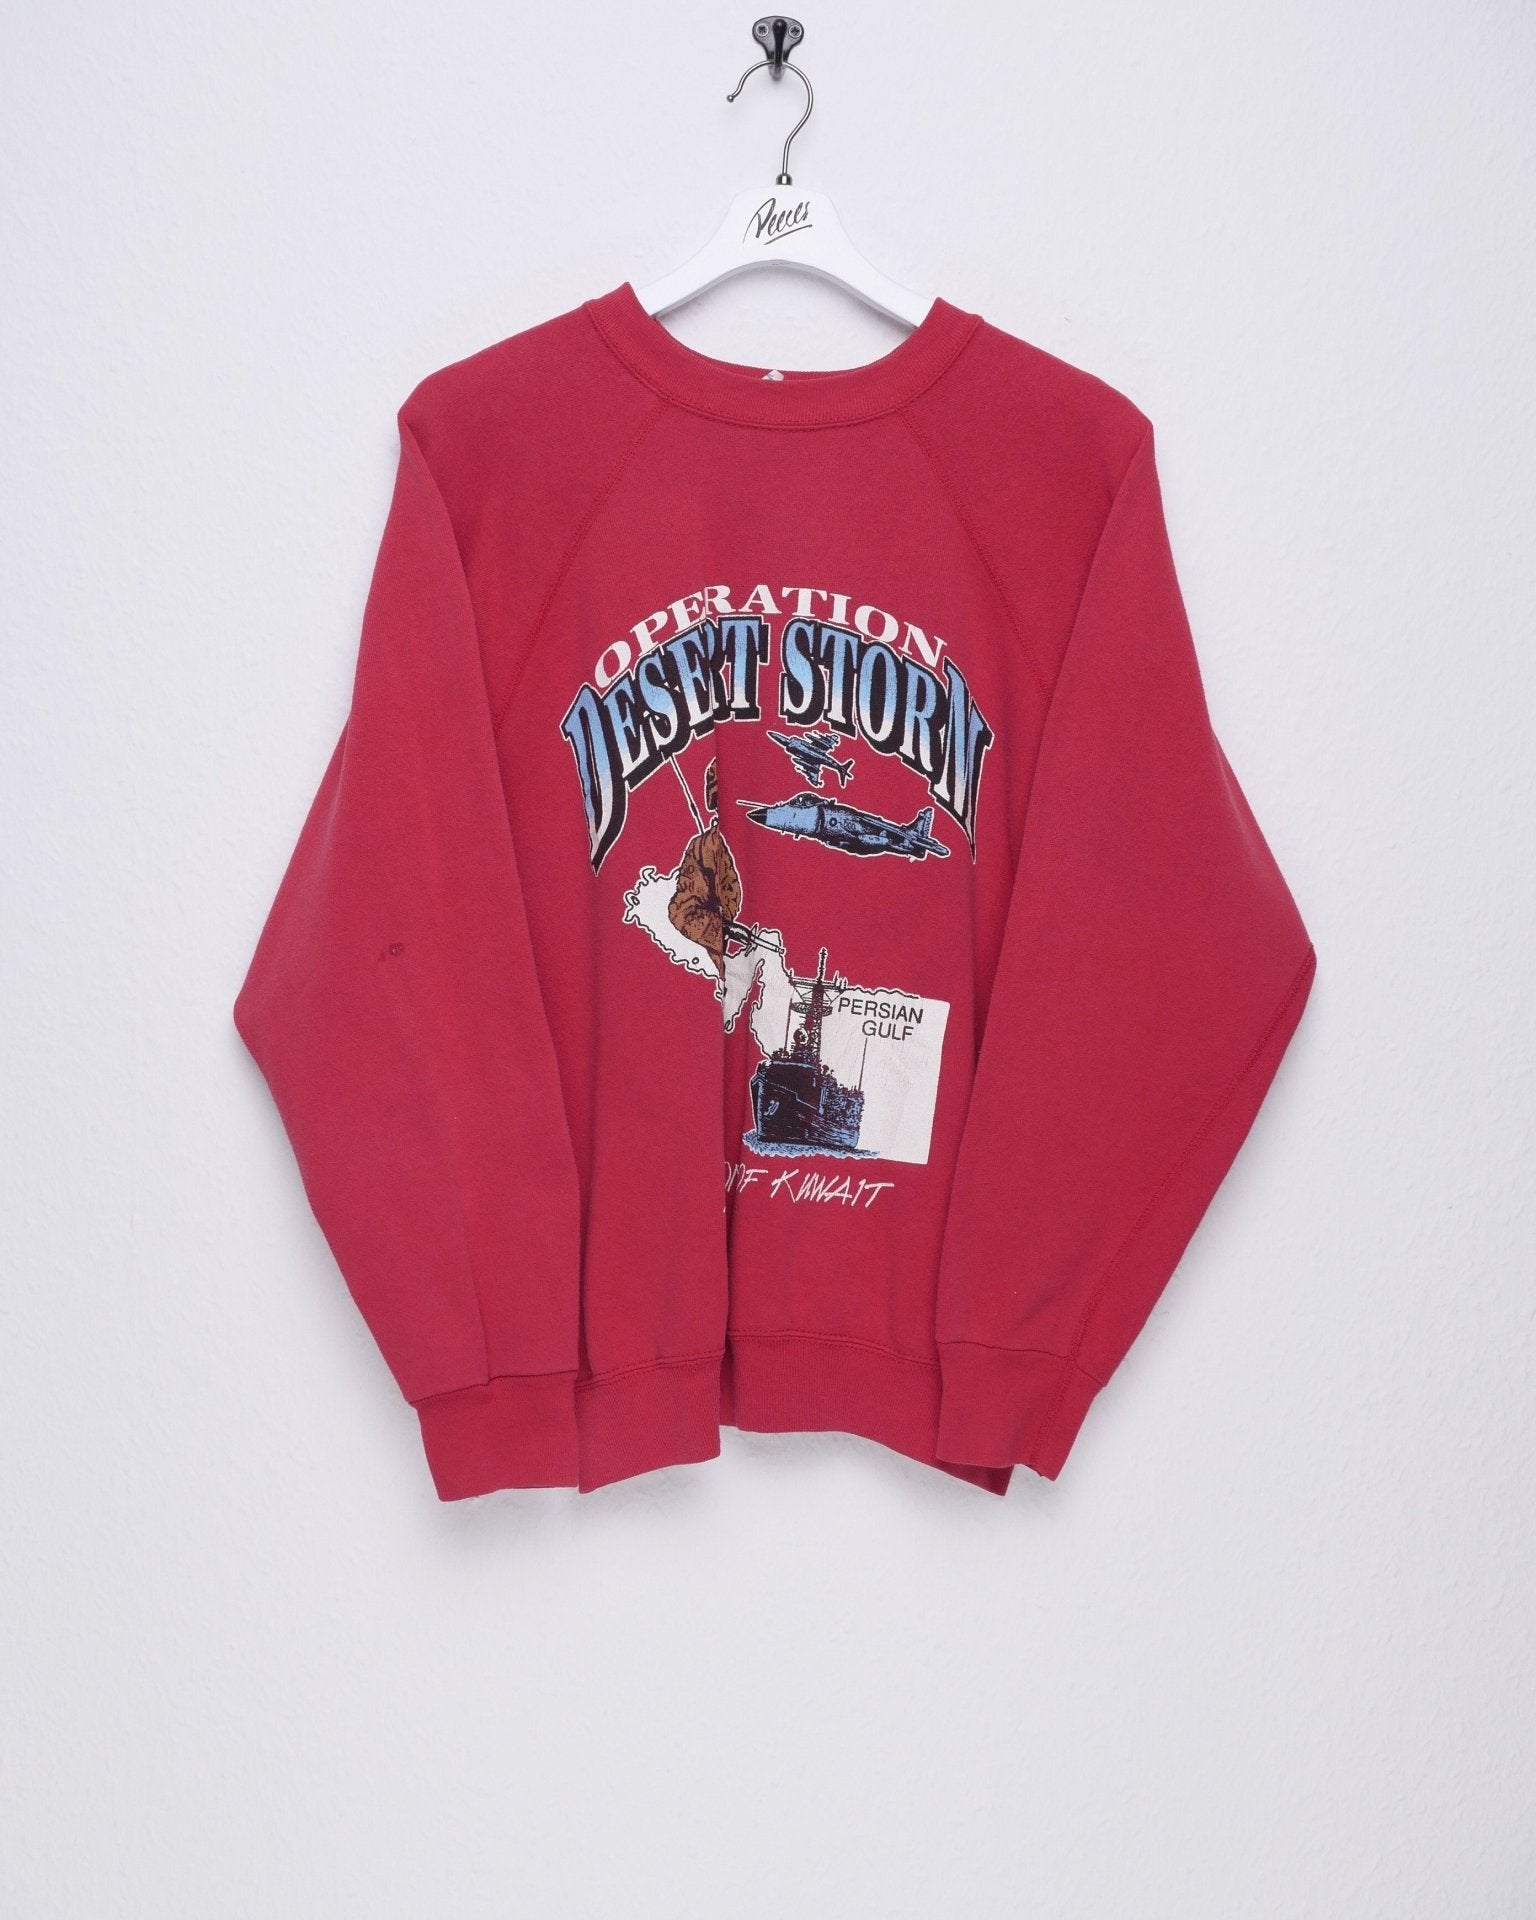 printed 'Liberation of Kuwait 1991' red Sweater - Peeces